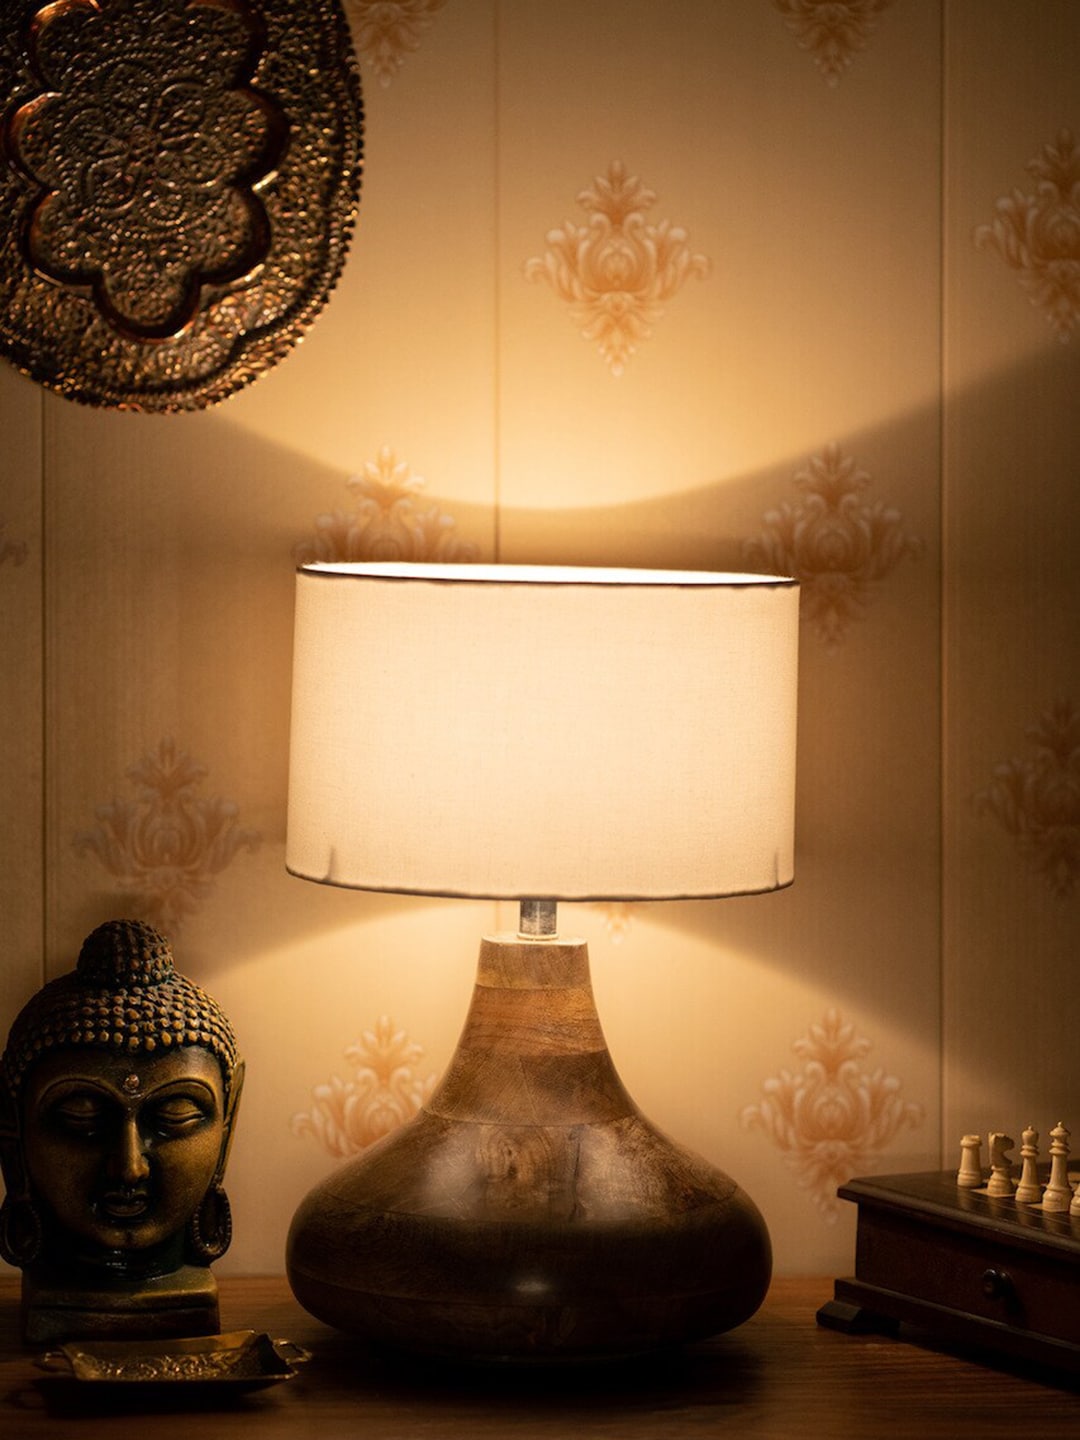 nakshikathaa Brown & White Table Lamp with Shade Price in India